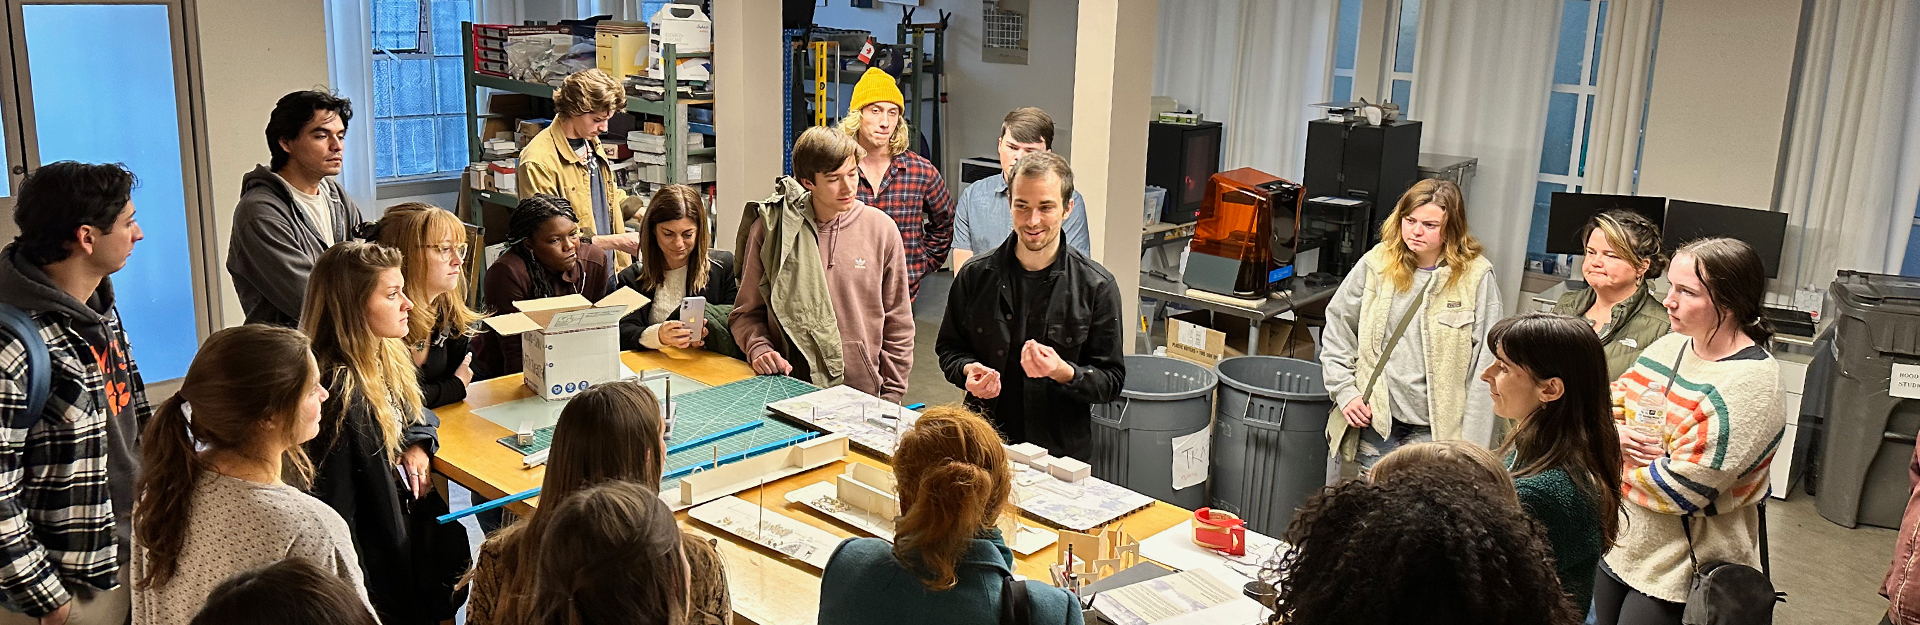 landscape architecture studio with students and professors